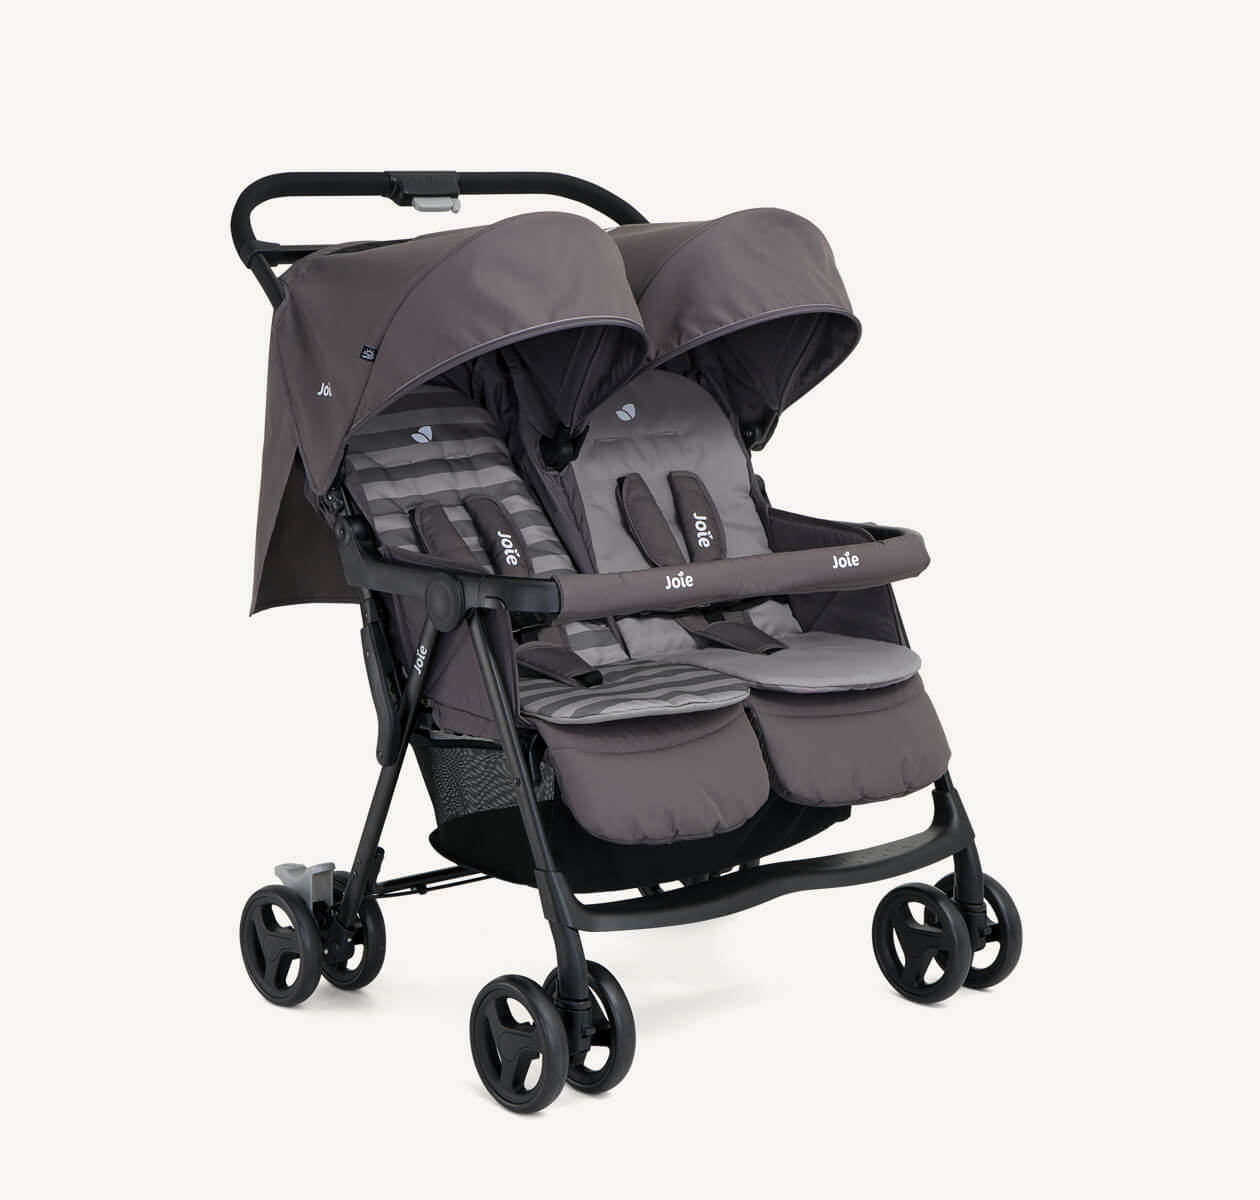  The Joie Aire Twin side-by-side double stroller in dark gray with two tone striped seat inserts, at an angle.